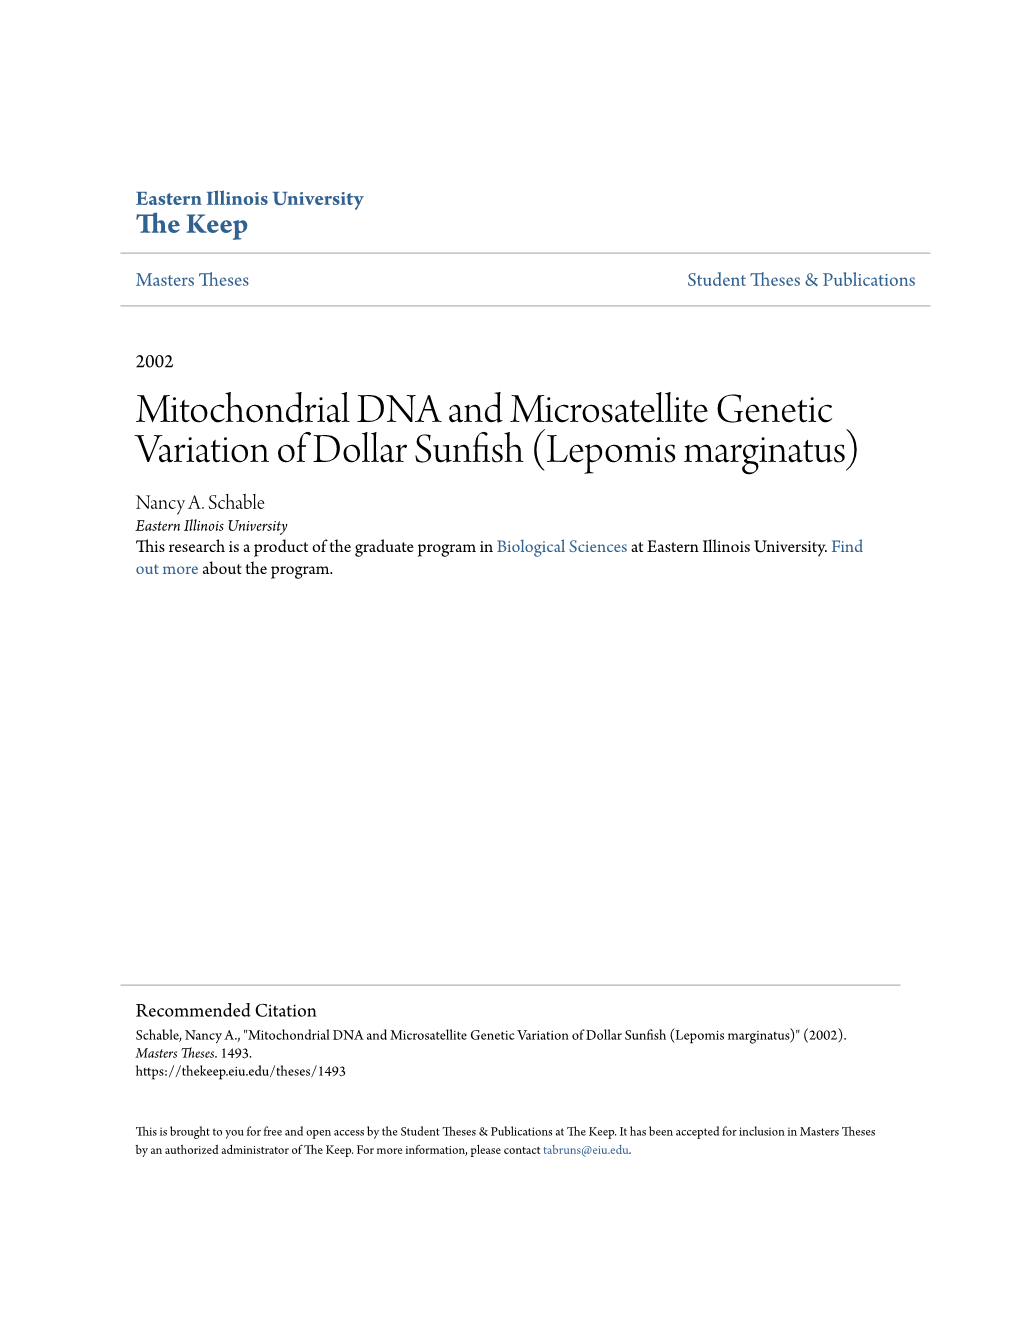 Mitochondrial DNA and Microsatellite Genetic Variation of Dollar Sunfish (Lepomis Marginatus) Nancy A